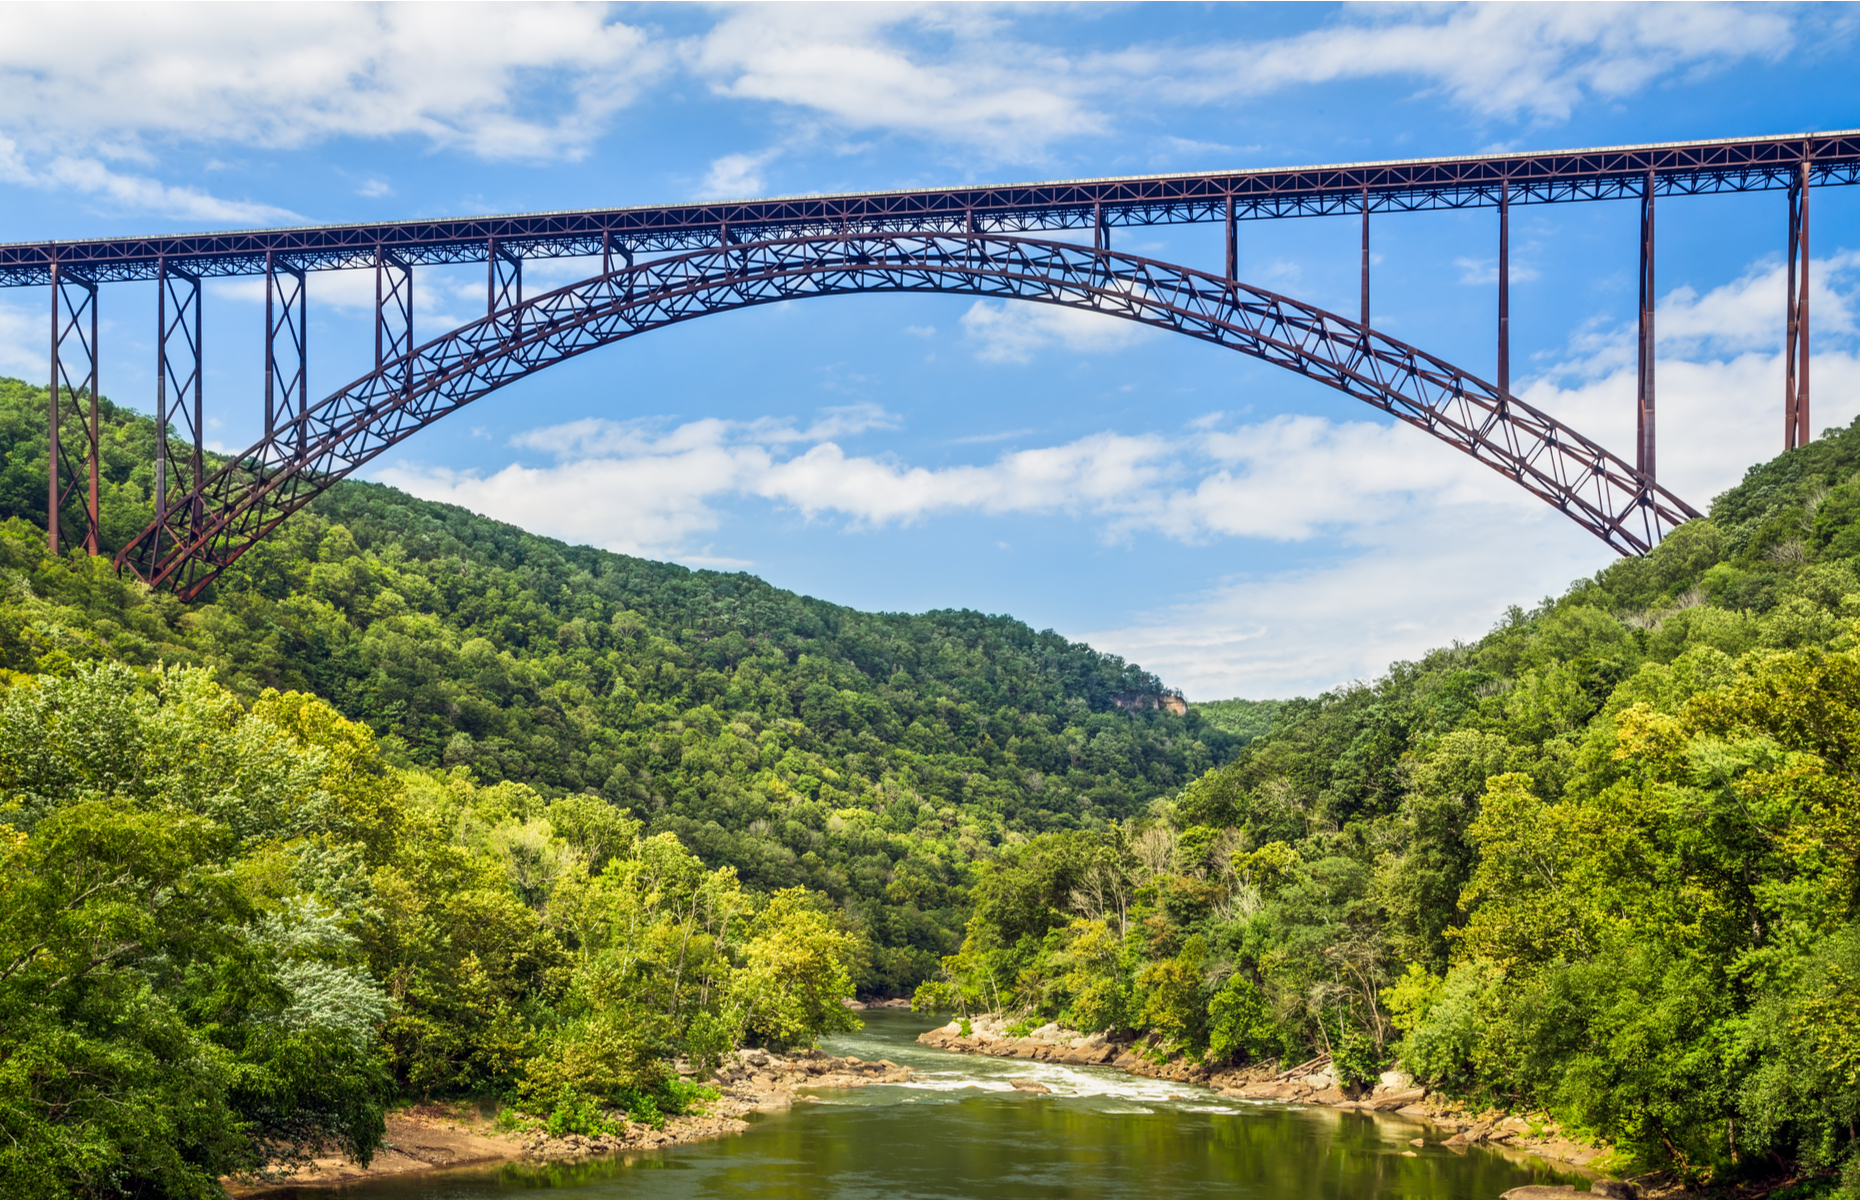 <p class="p1"><span>Though it’s since lost its title as the world’s longest single-span arch bridge, the New River Gorge Bridge in Fayetteville is no less a marvel of engineering, stretching 3,030 feet long and standing 876 feet high. For <a href="https://officialbridgeday.com/bridge-day-info" rel="noreferrer noopener"><span>one day every year</span></a></span><span>,</span><span> people are allowed to BASE jump off the bridge. </span></p>